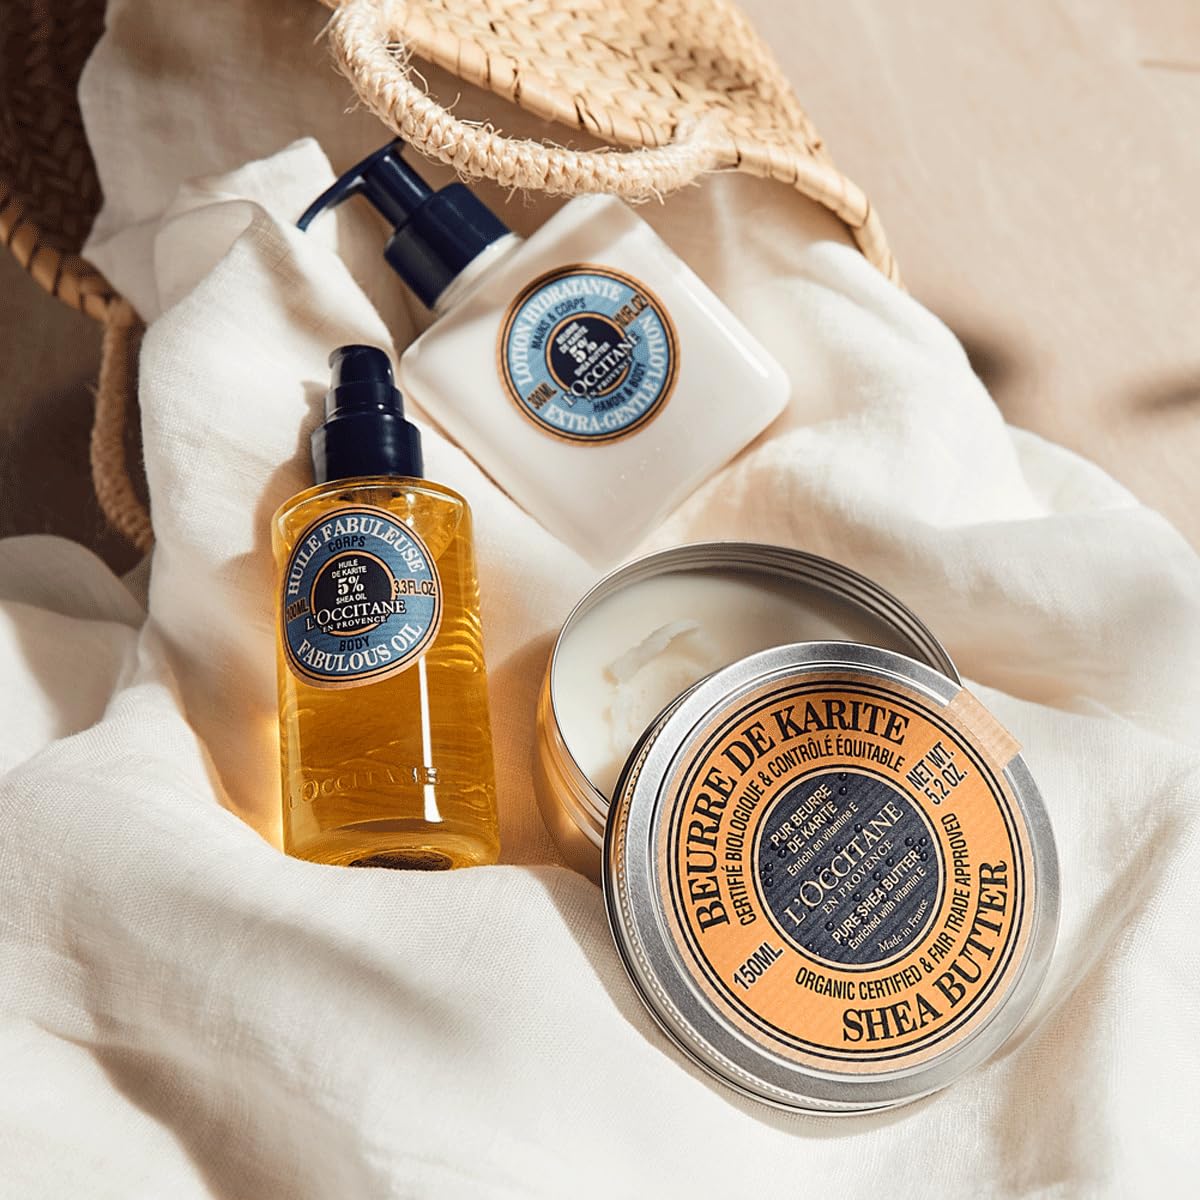 L'Occitane Pure Shea Butter: Organic Shea Butter, Nourish Dry Skin & Hair, With Vitamin E, Multitasking Beauty Balm, Protects From Dryness, Softening